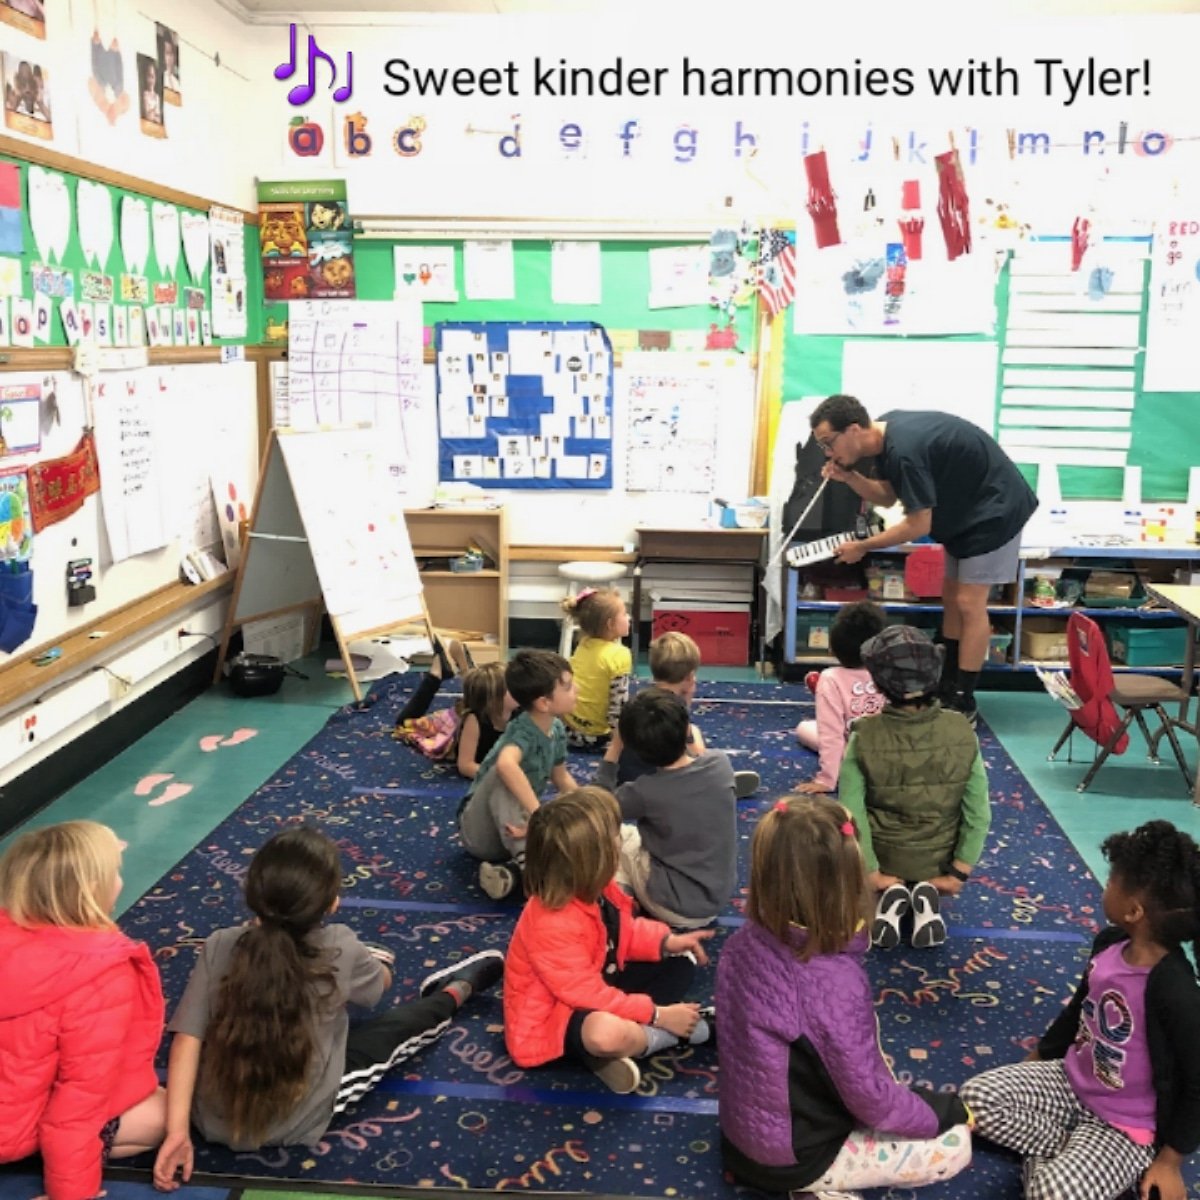 Our kinders had a fun class today learning how to harmonize with Tyler! #casamagic #musiceducationforall🎵🎼🎶🎵🎤